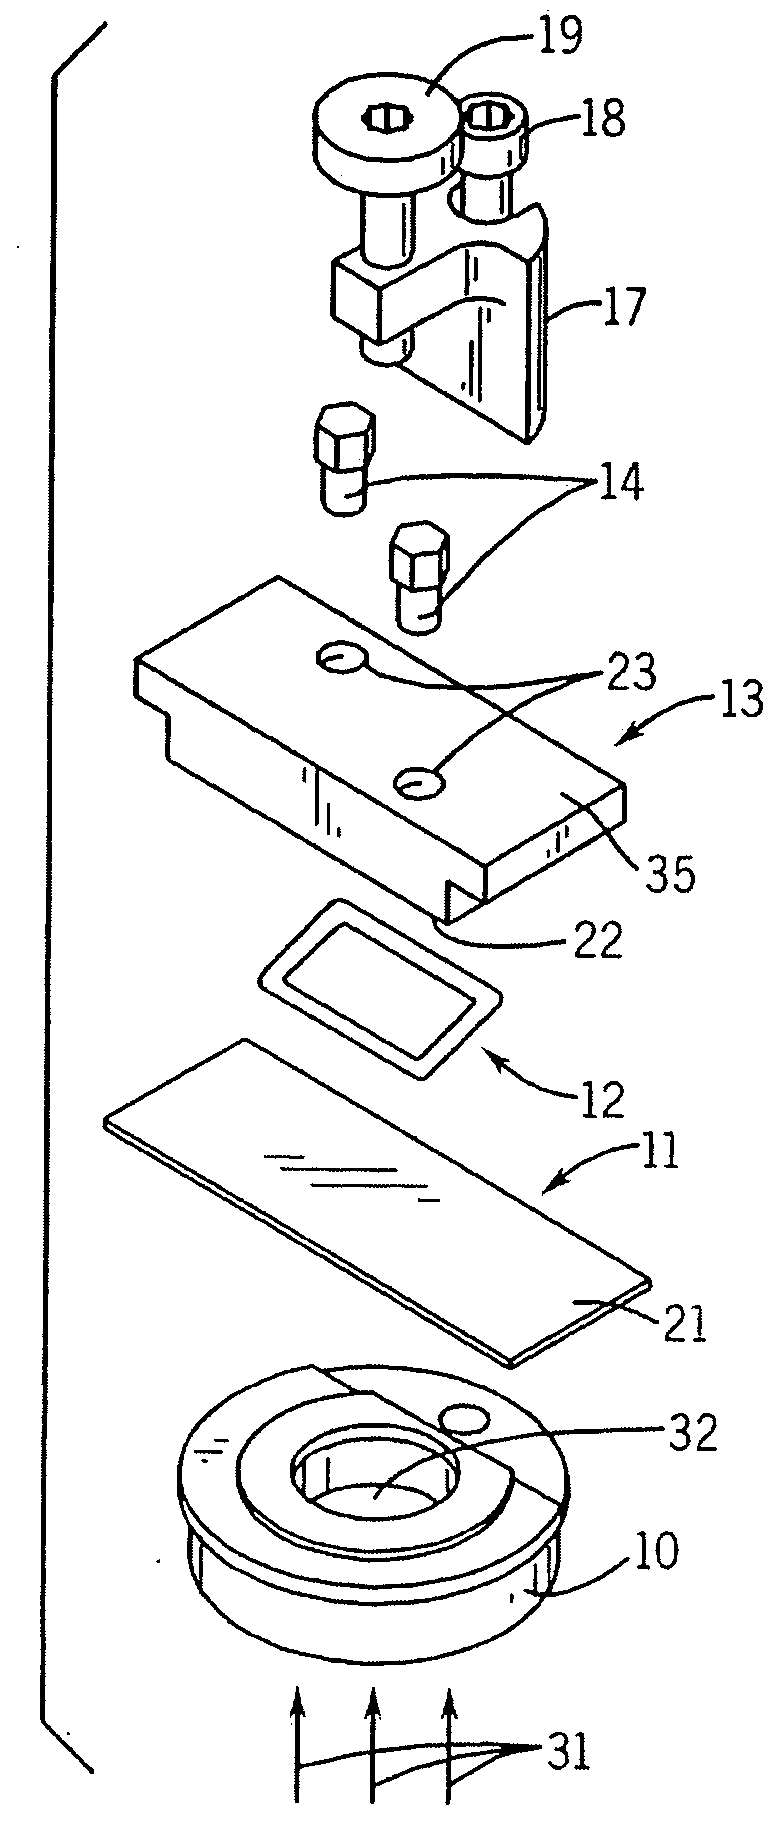 Microarray synthesis instrument and method